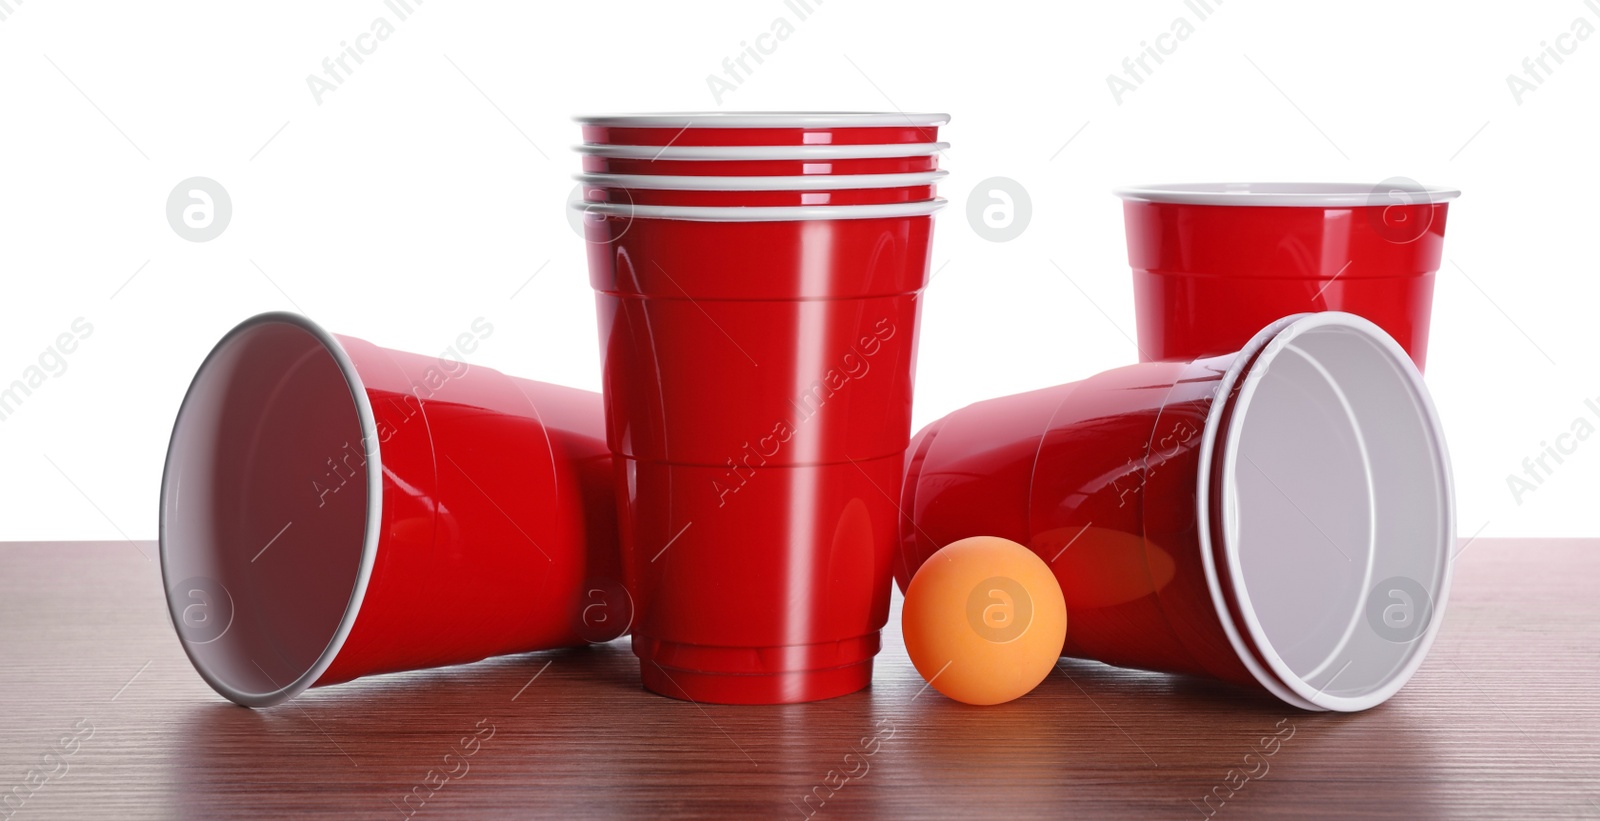 Photo of Plastic cups and ball for beer pong on wooden table against white background